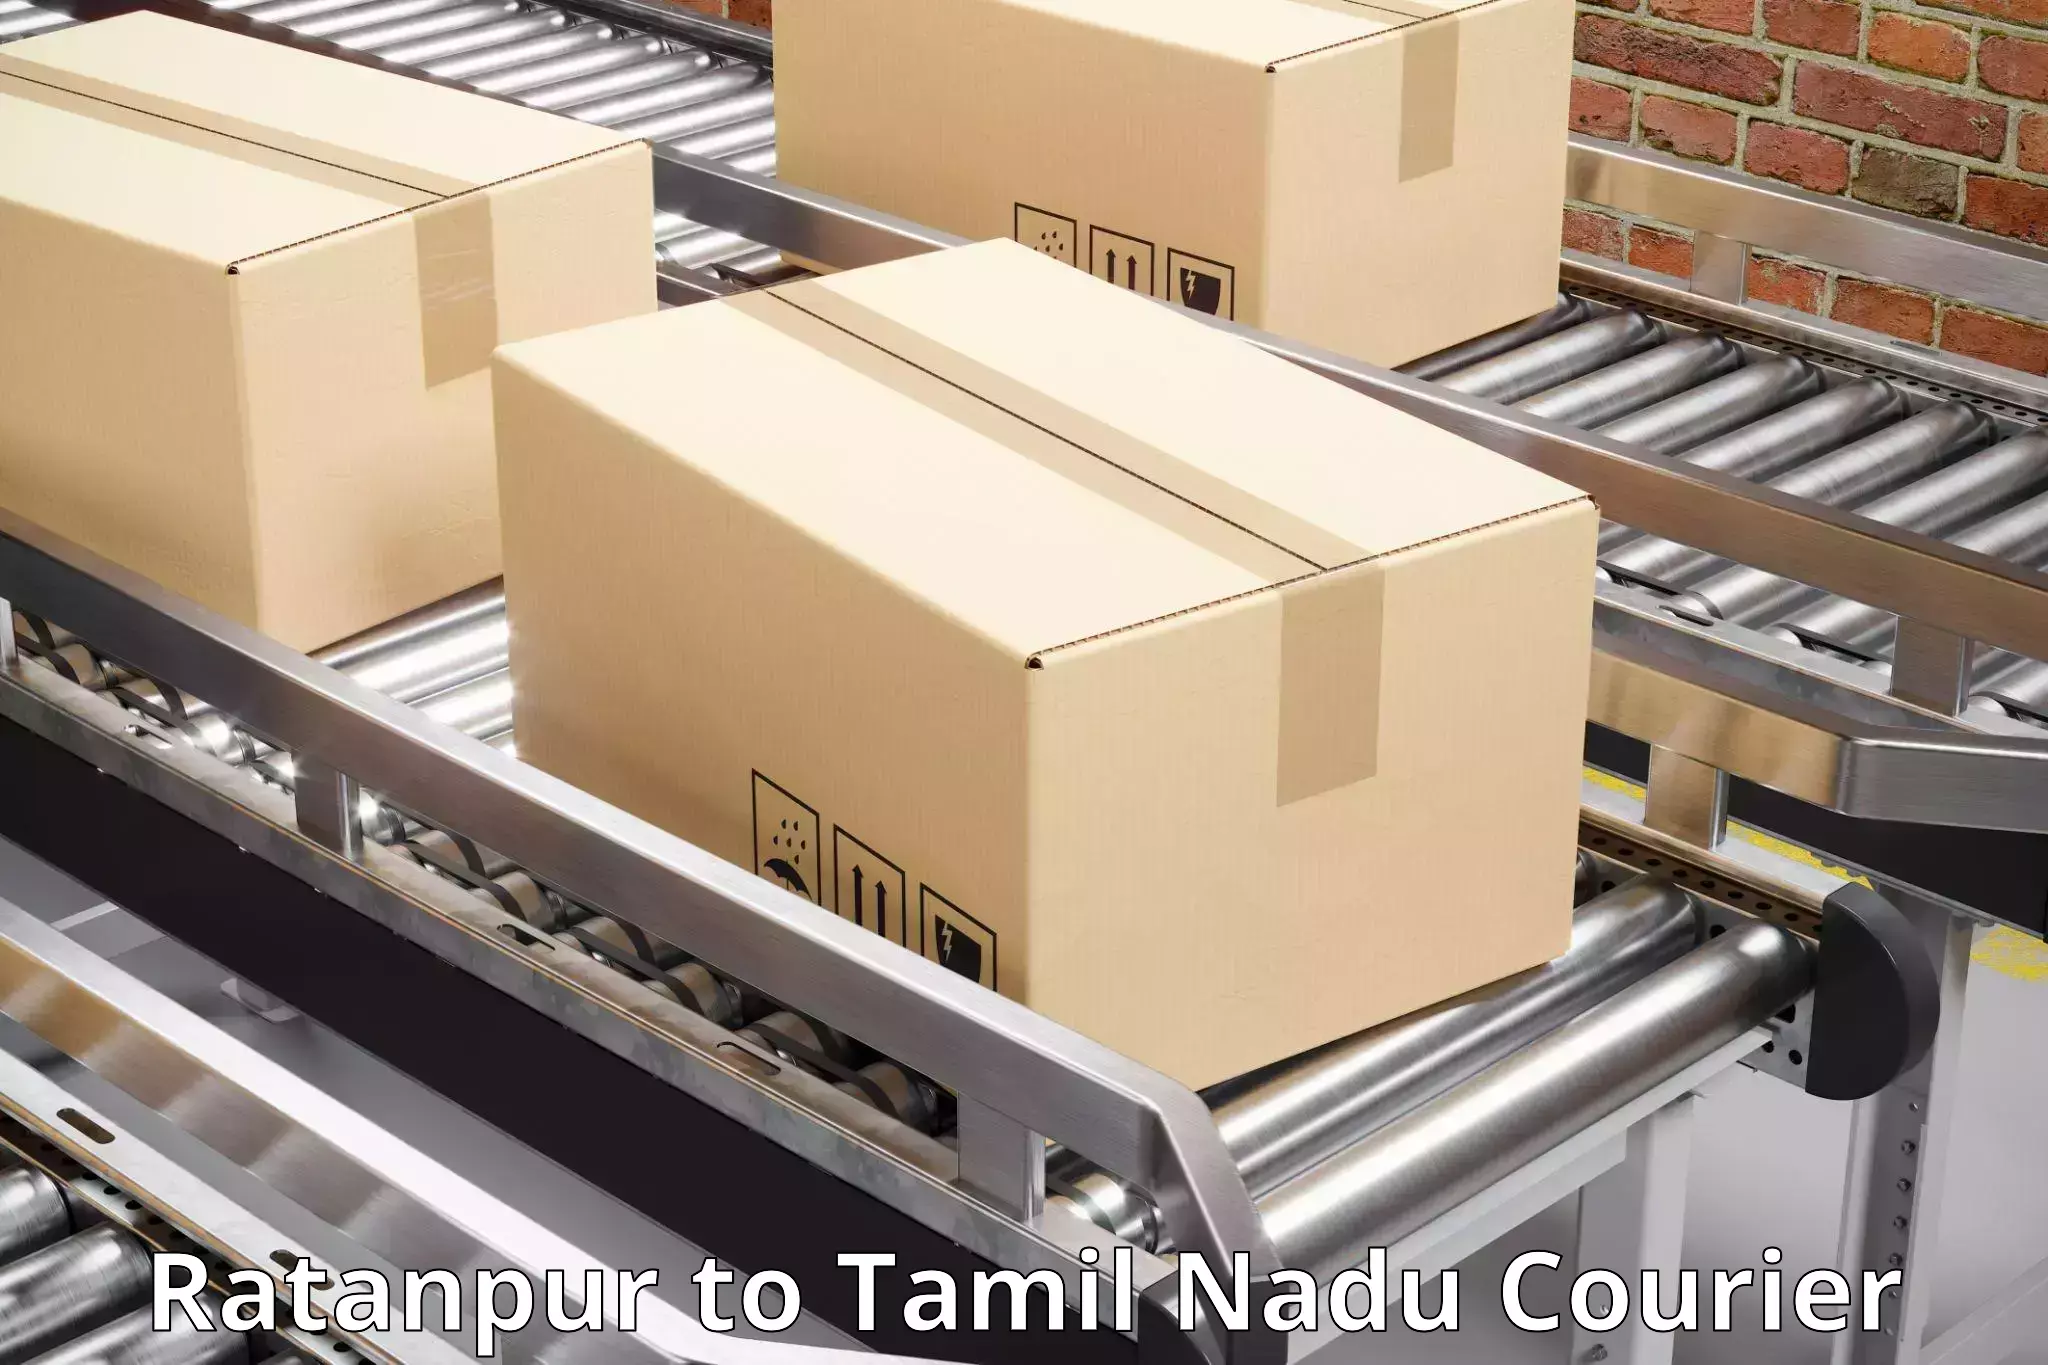 Global courier networks Ratanpur to Vadipatti